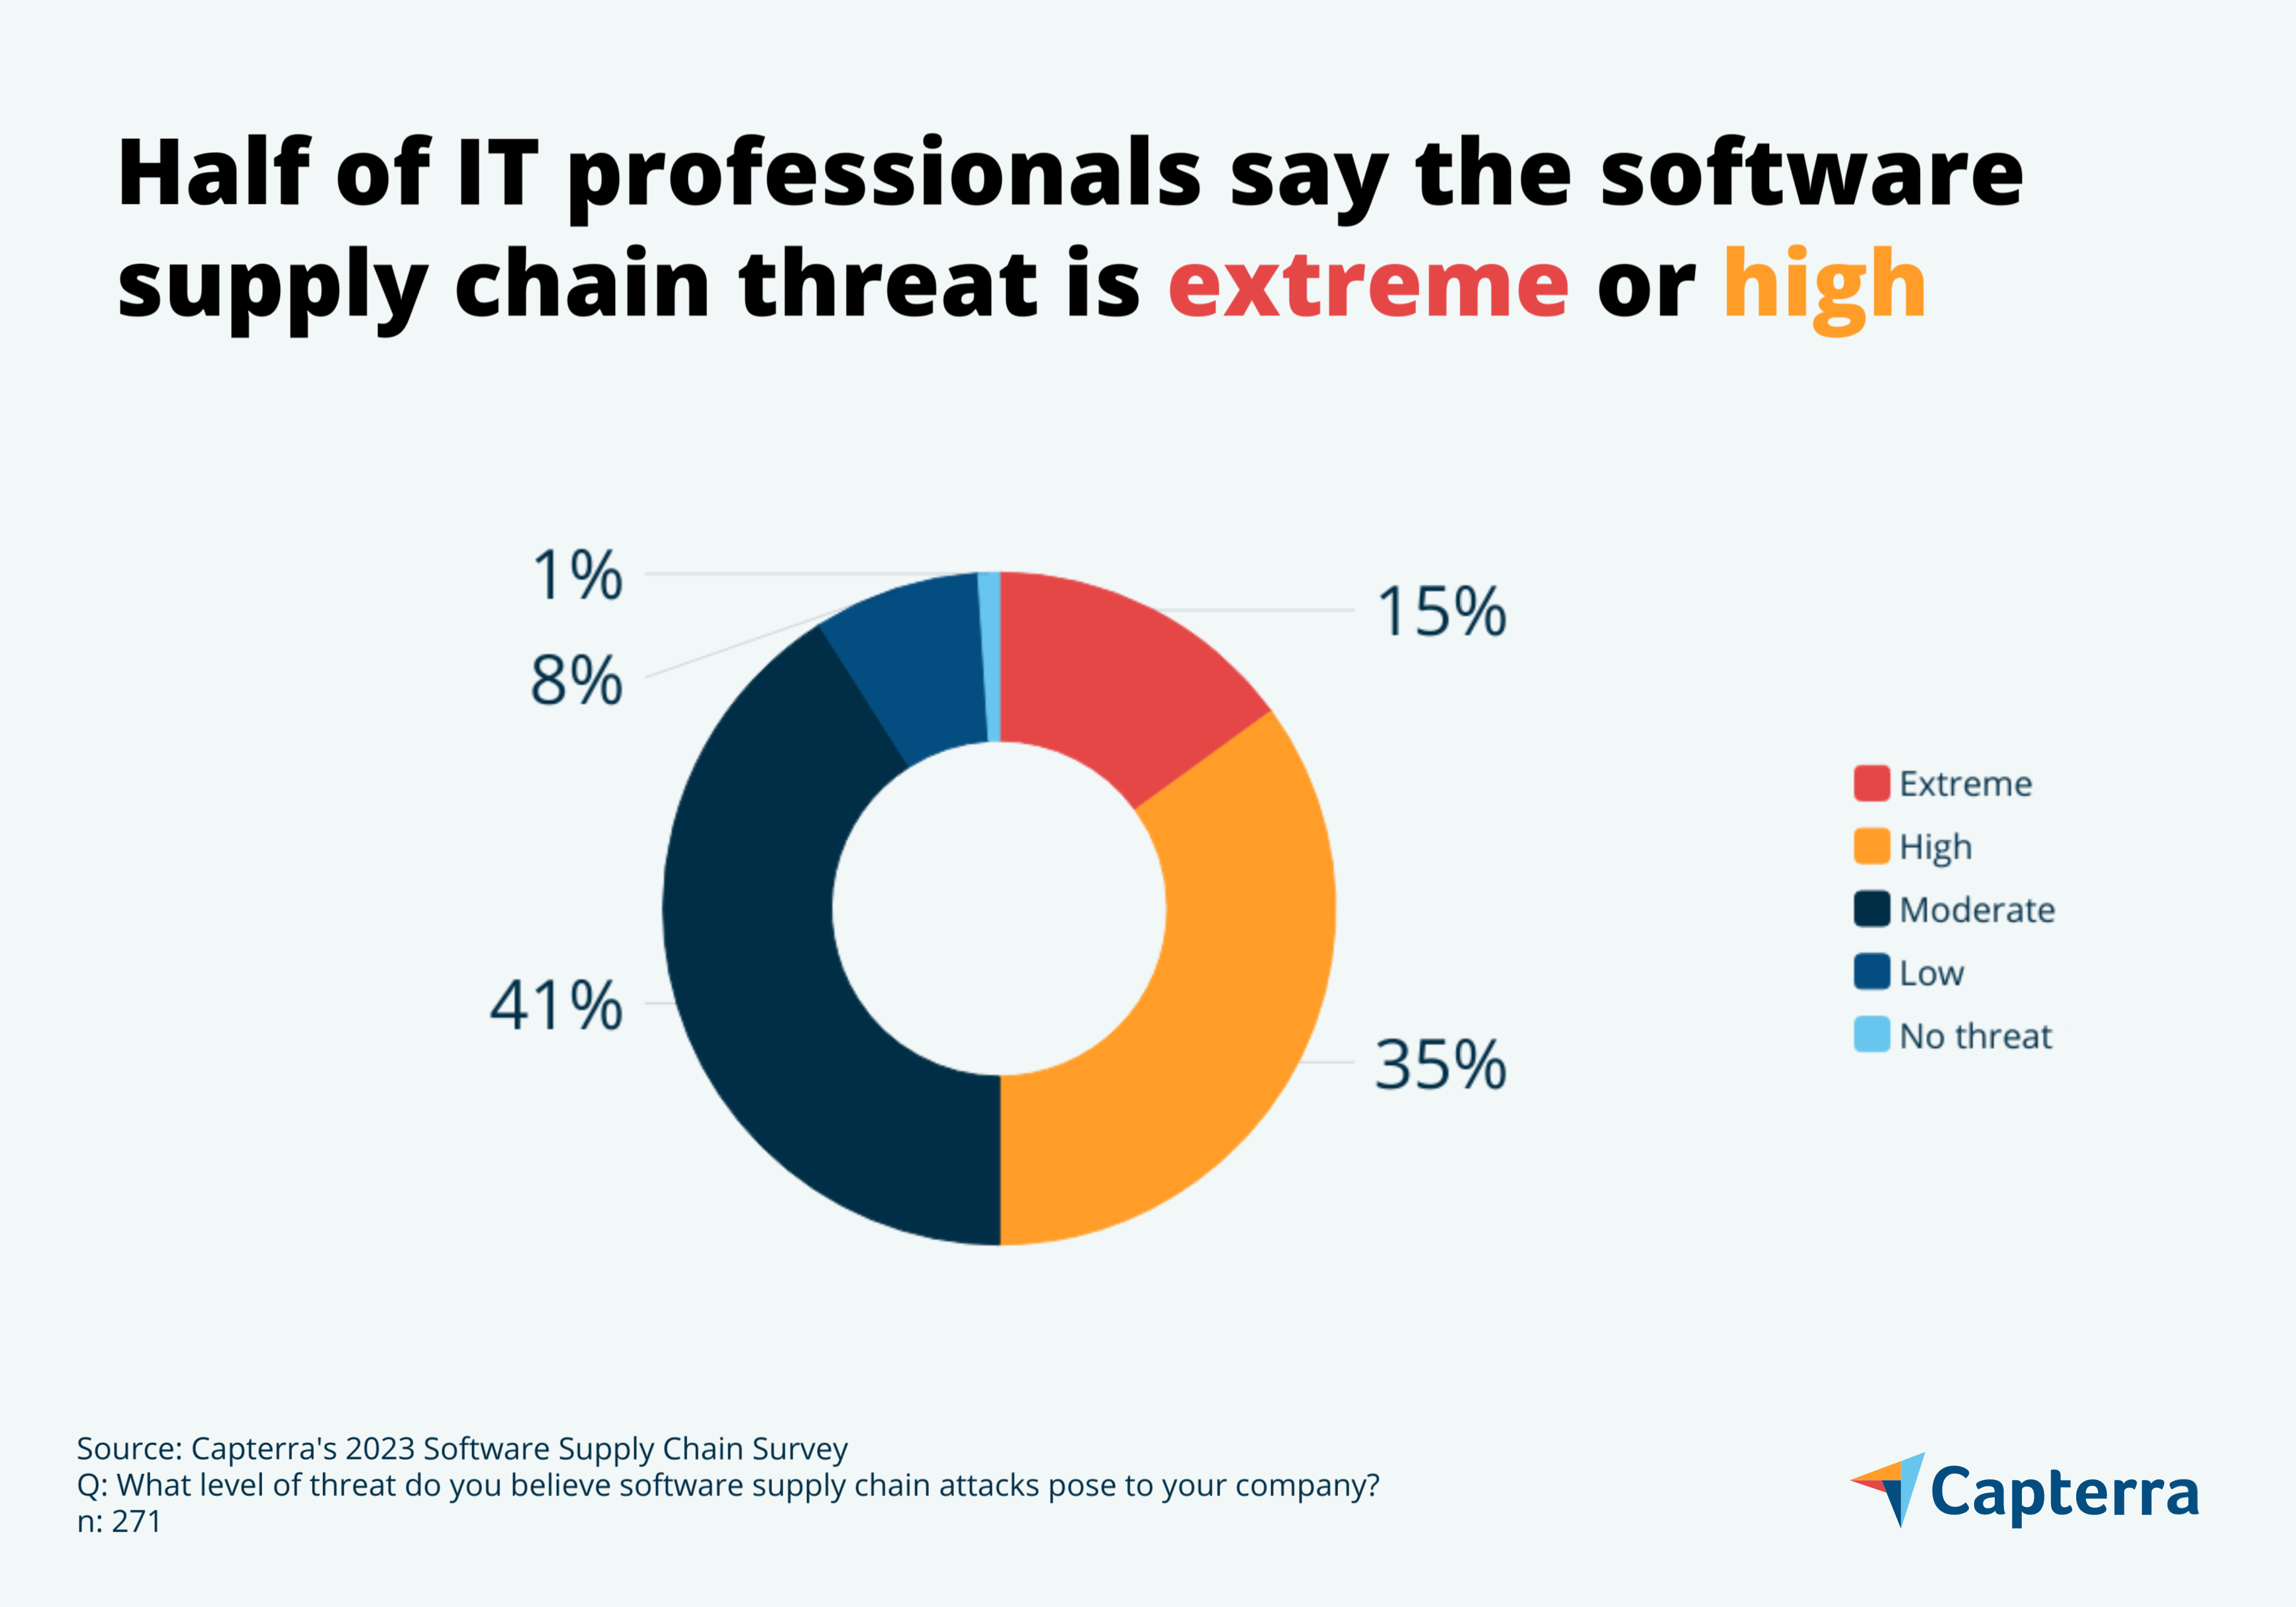 Supply chain attack is extreme graphic for the blog article "Three in Five Businesses Affected by Software Supply Chain Attacks in Last 12 Months"